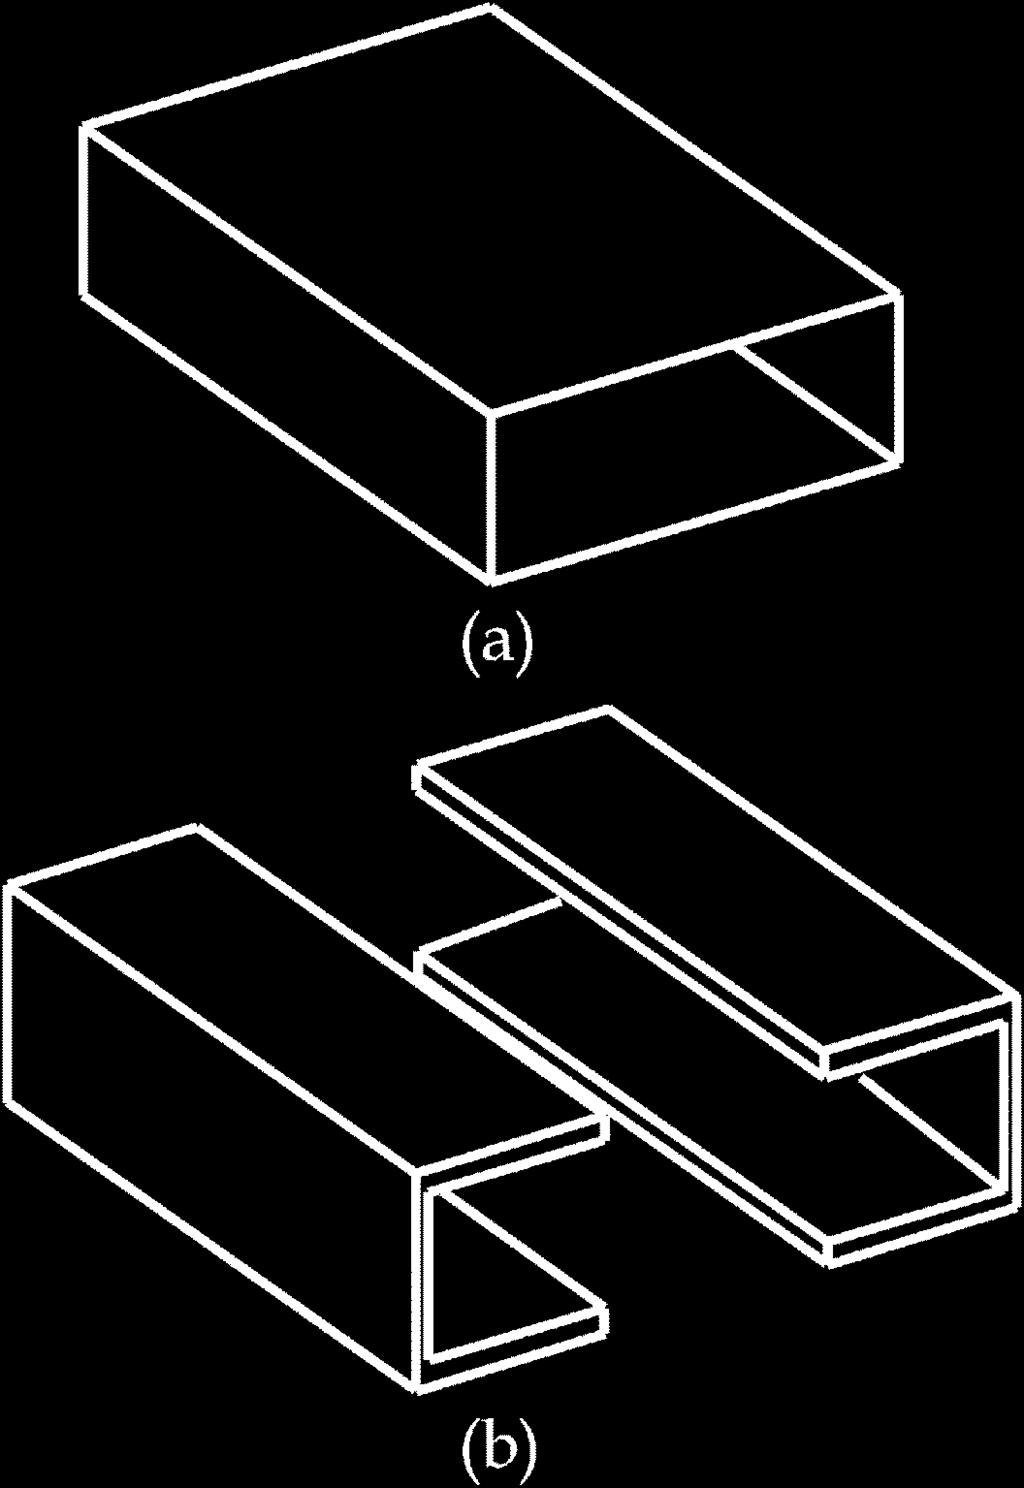 Feed Network of Hollow Metallic Waveguides Fig. 9. Simulated waveguide-to-microstrip matching results. (a) Waveguide-to-coaxial. (b) Coaxial-to-microstrip.